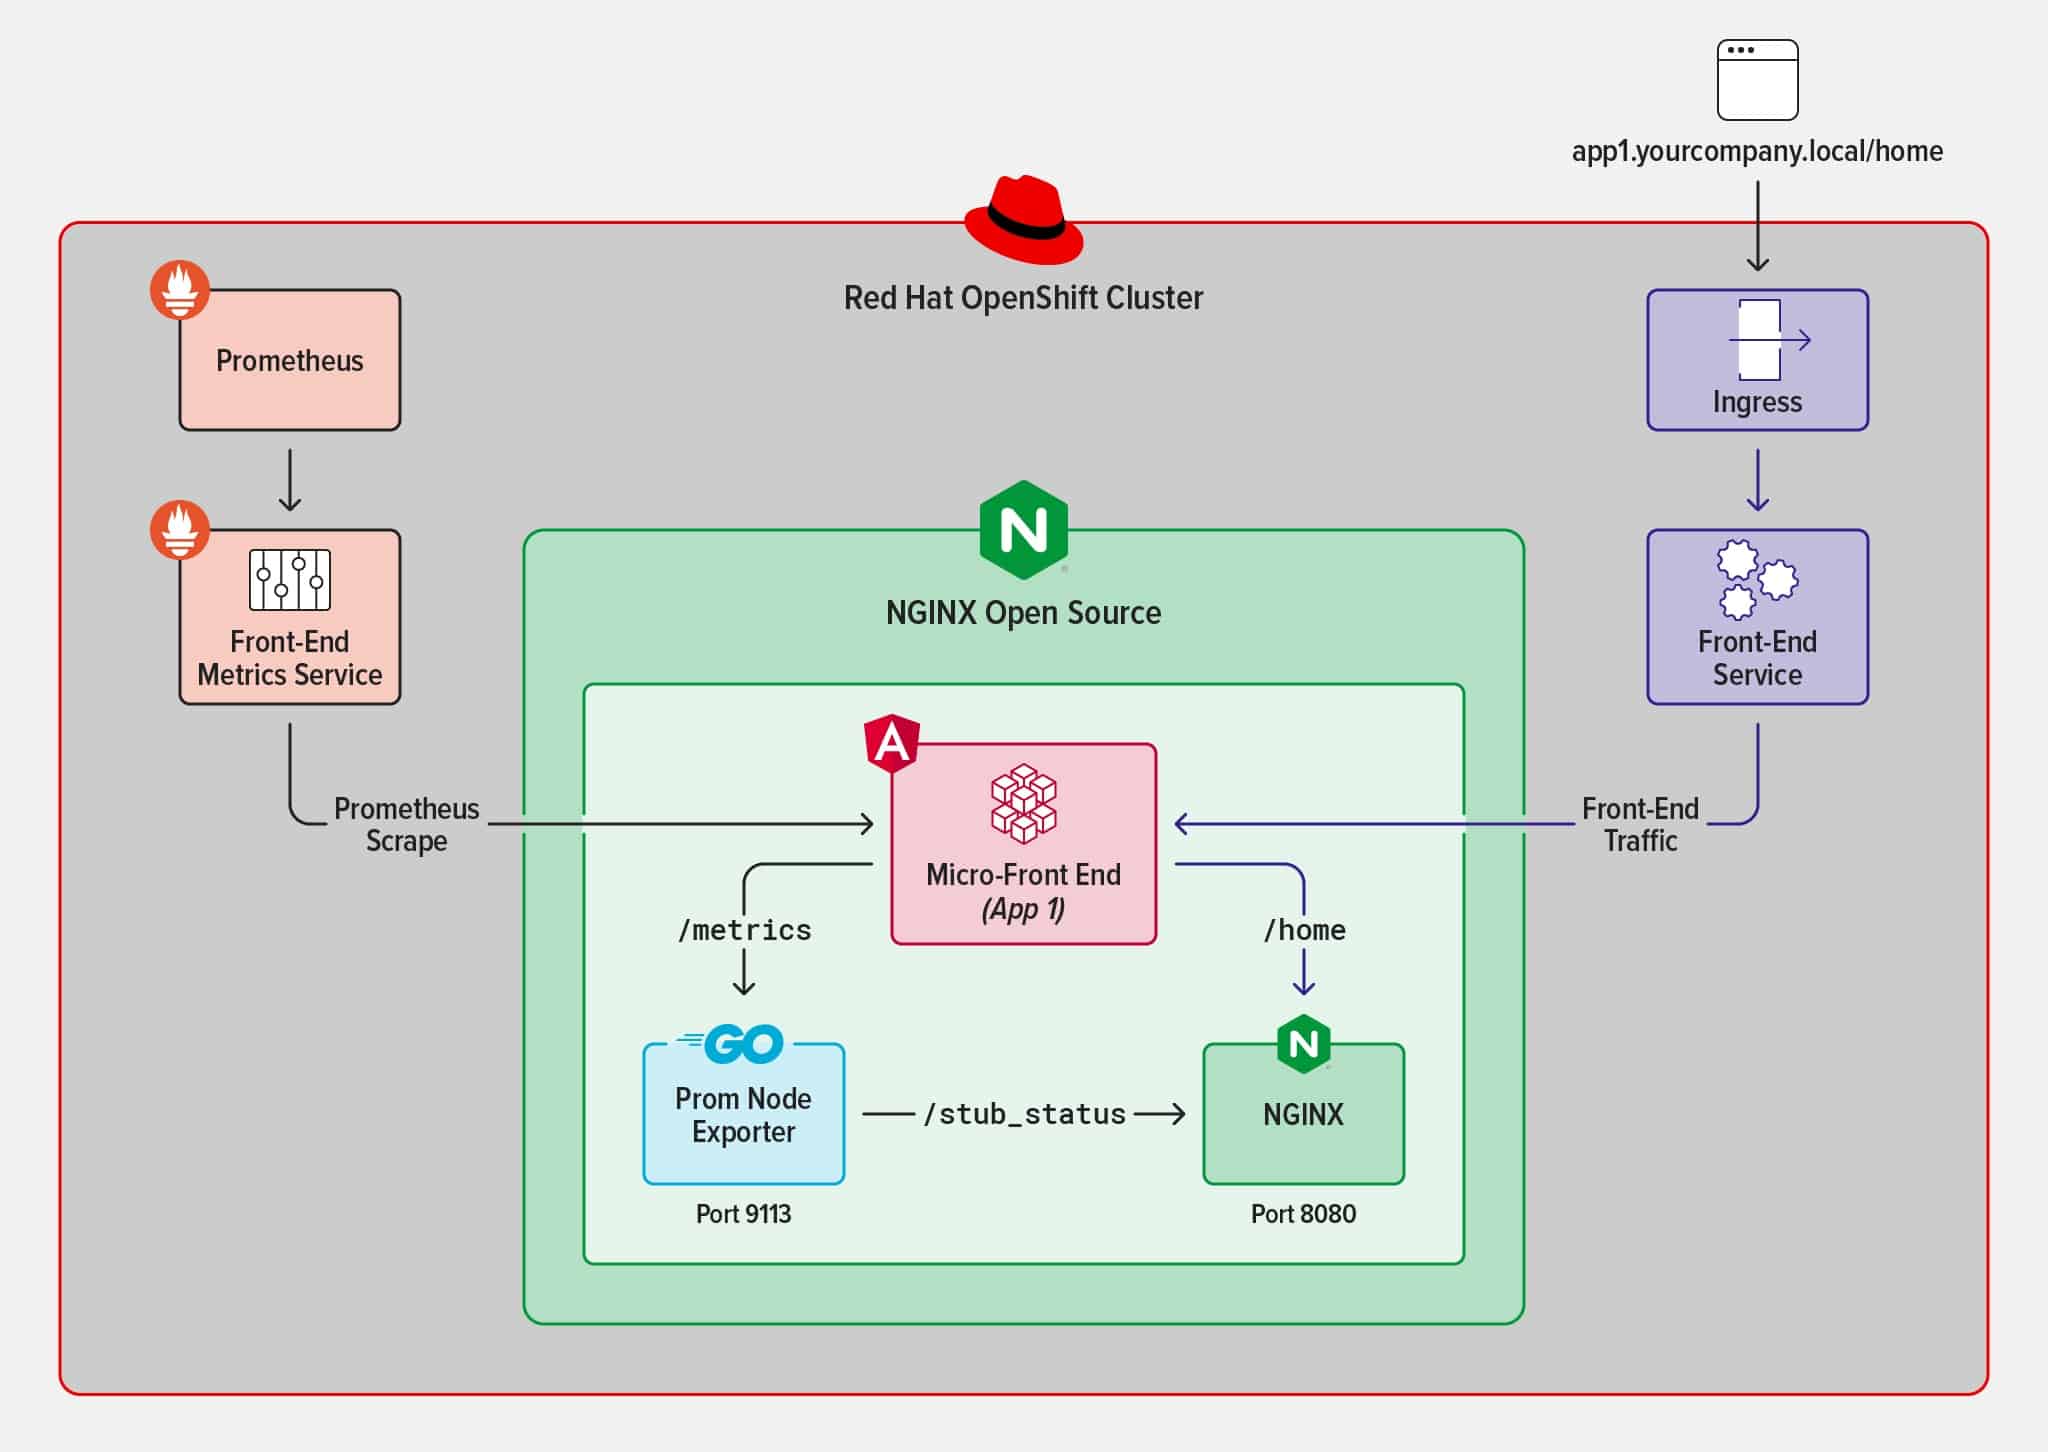 Diagram of Red Hat OpenShift Cluster